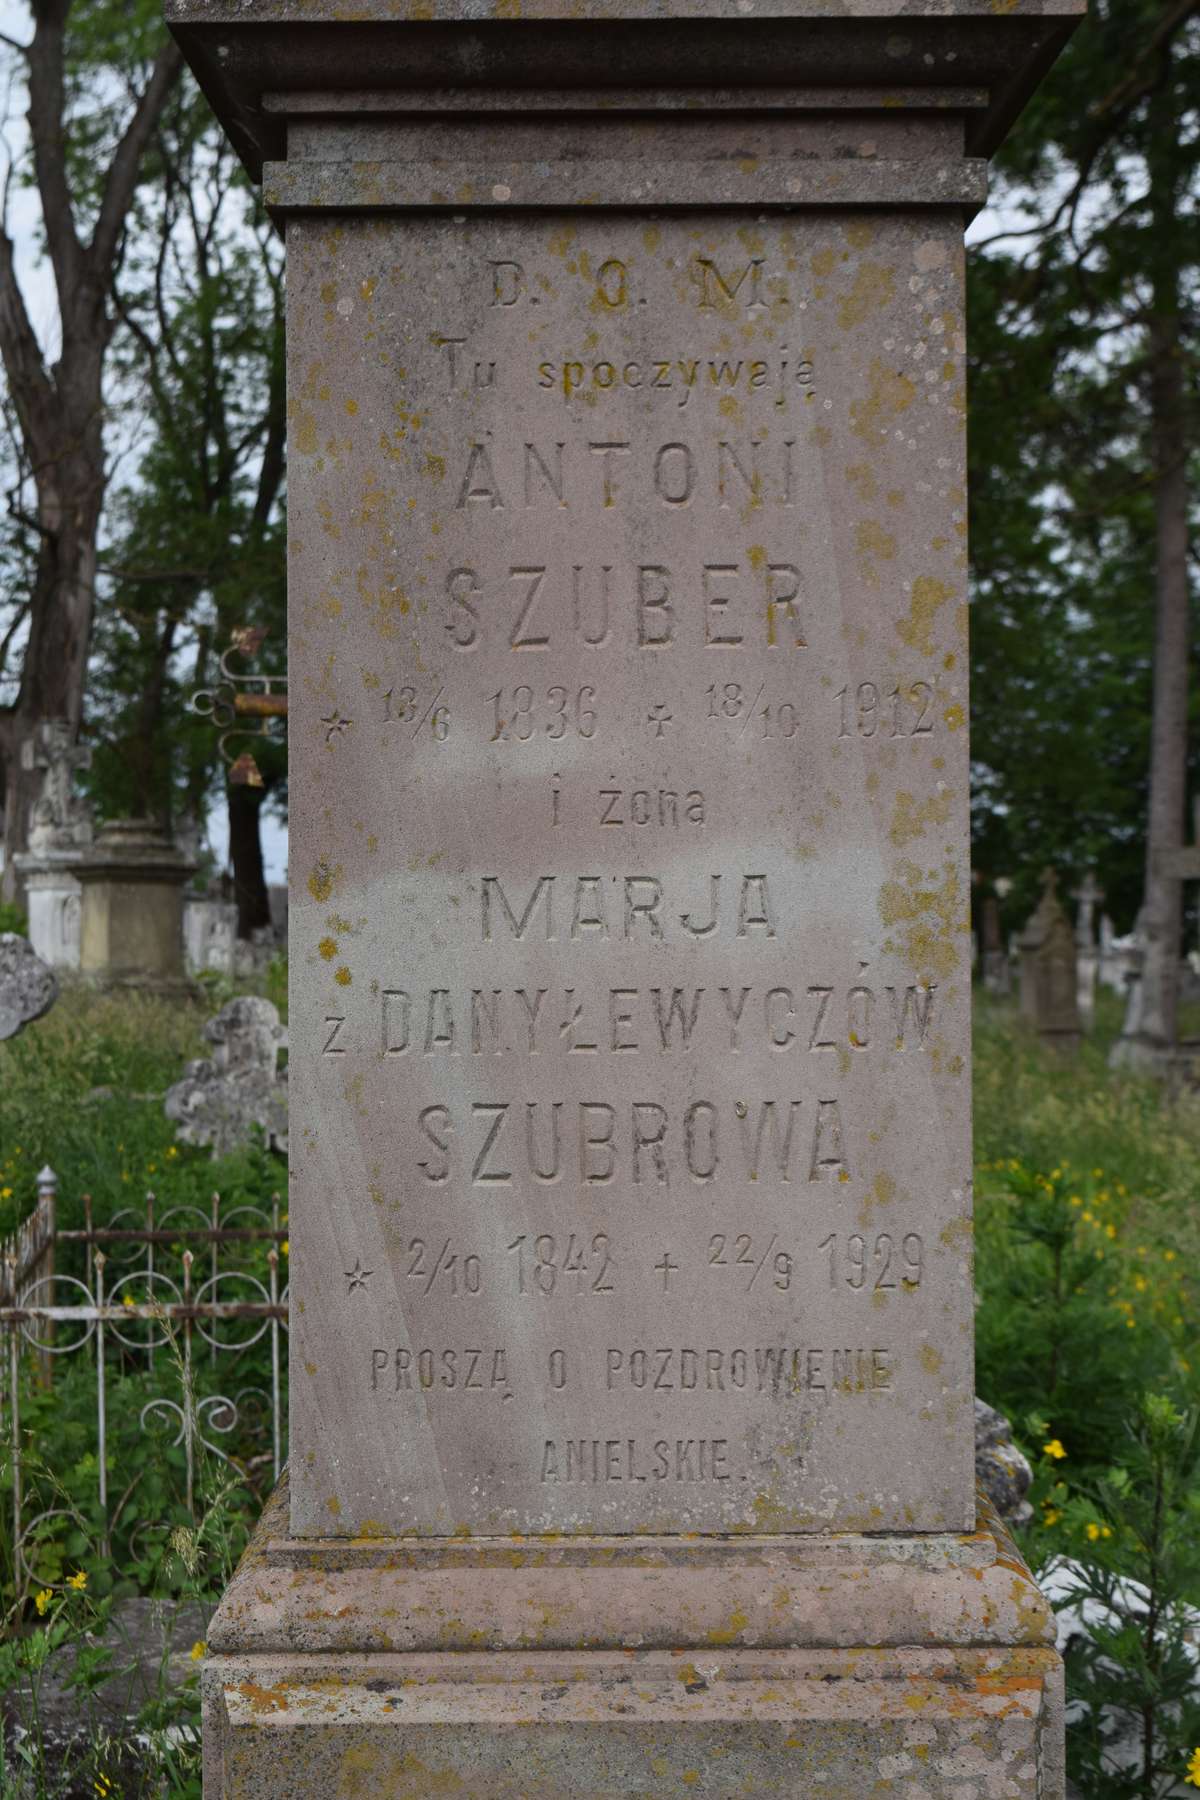 Fragment of the tombstone of Antoni and Maria Szuber, Zbarazh cemetery, as of 2018